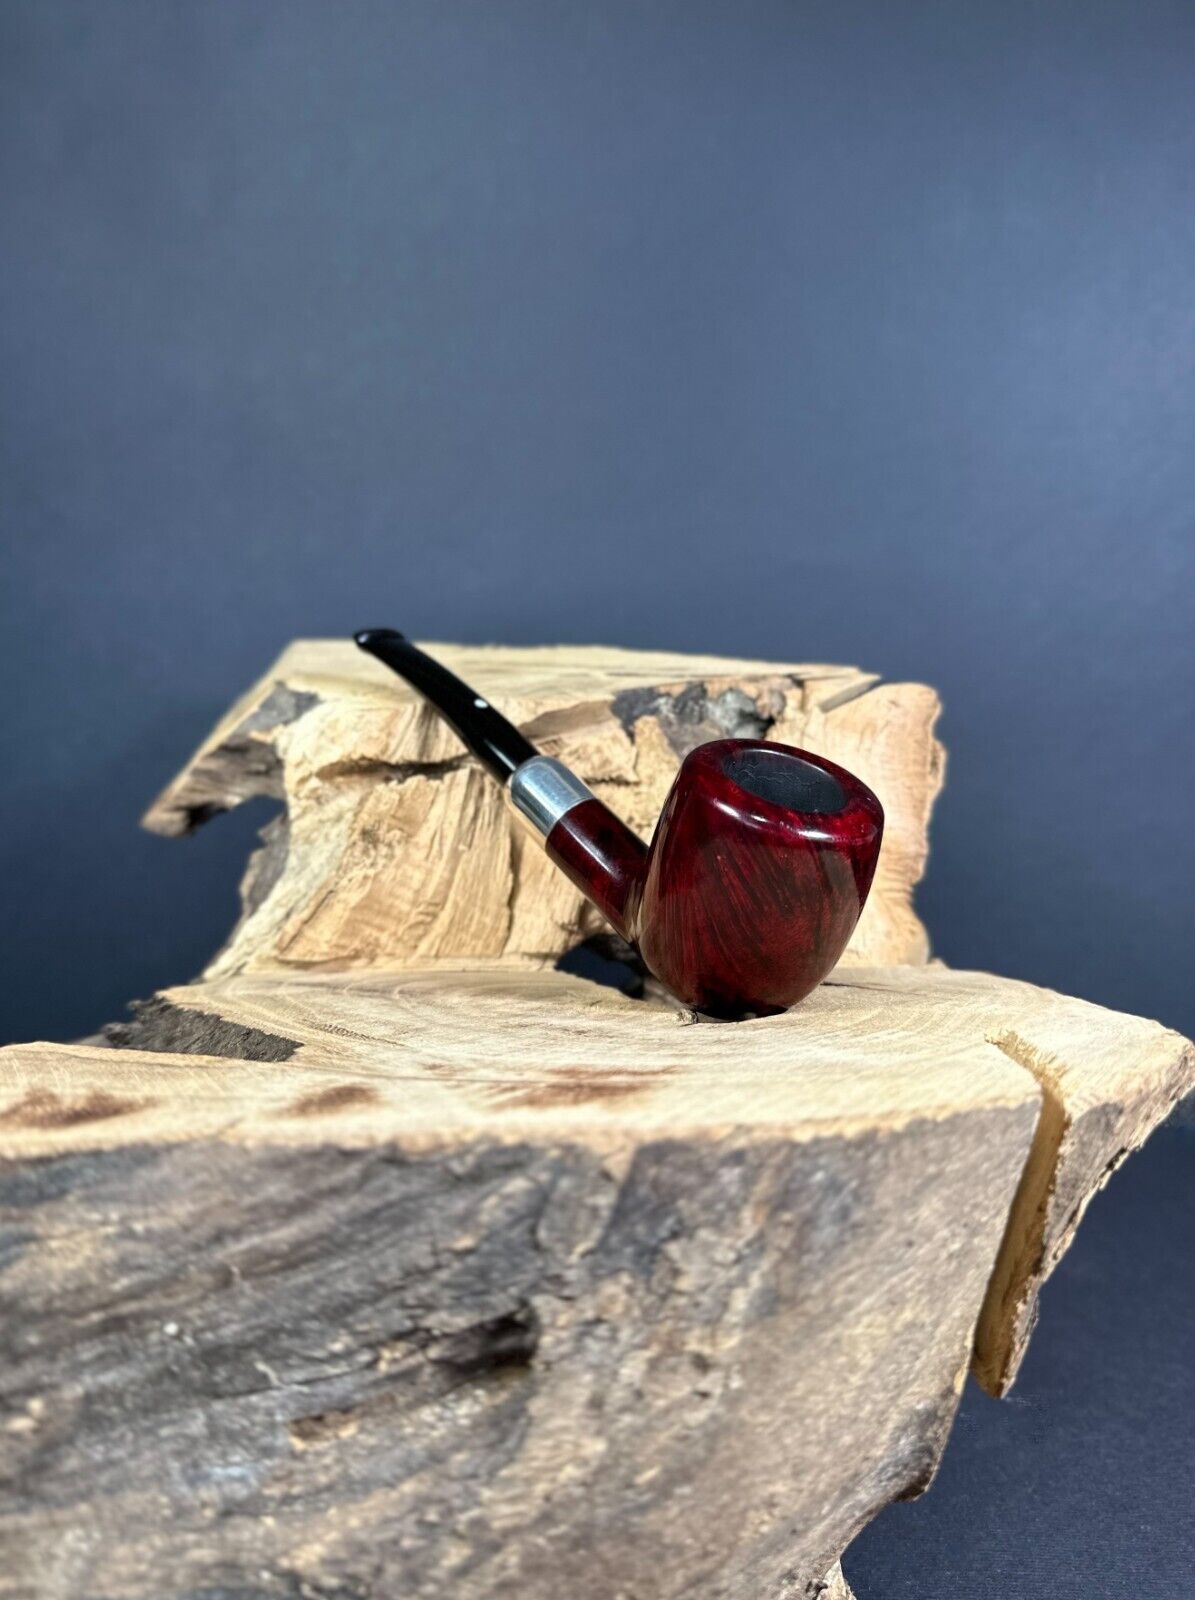 Vauen Luxus 8368 925 Acorn/Pear Shaped Smooth Finish Smoking Pipe With Two Stems